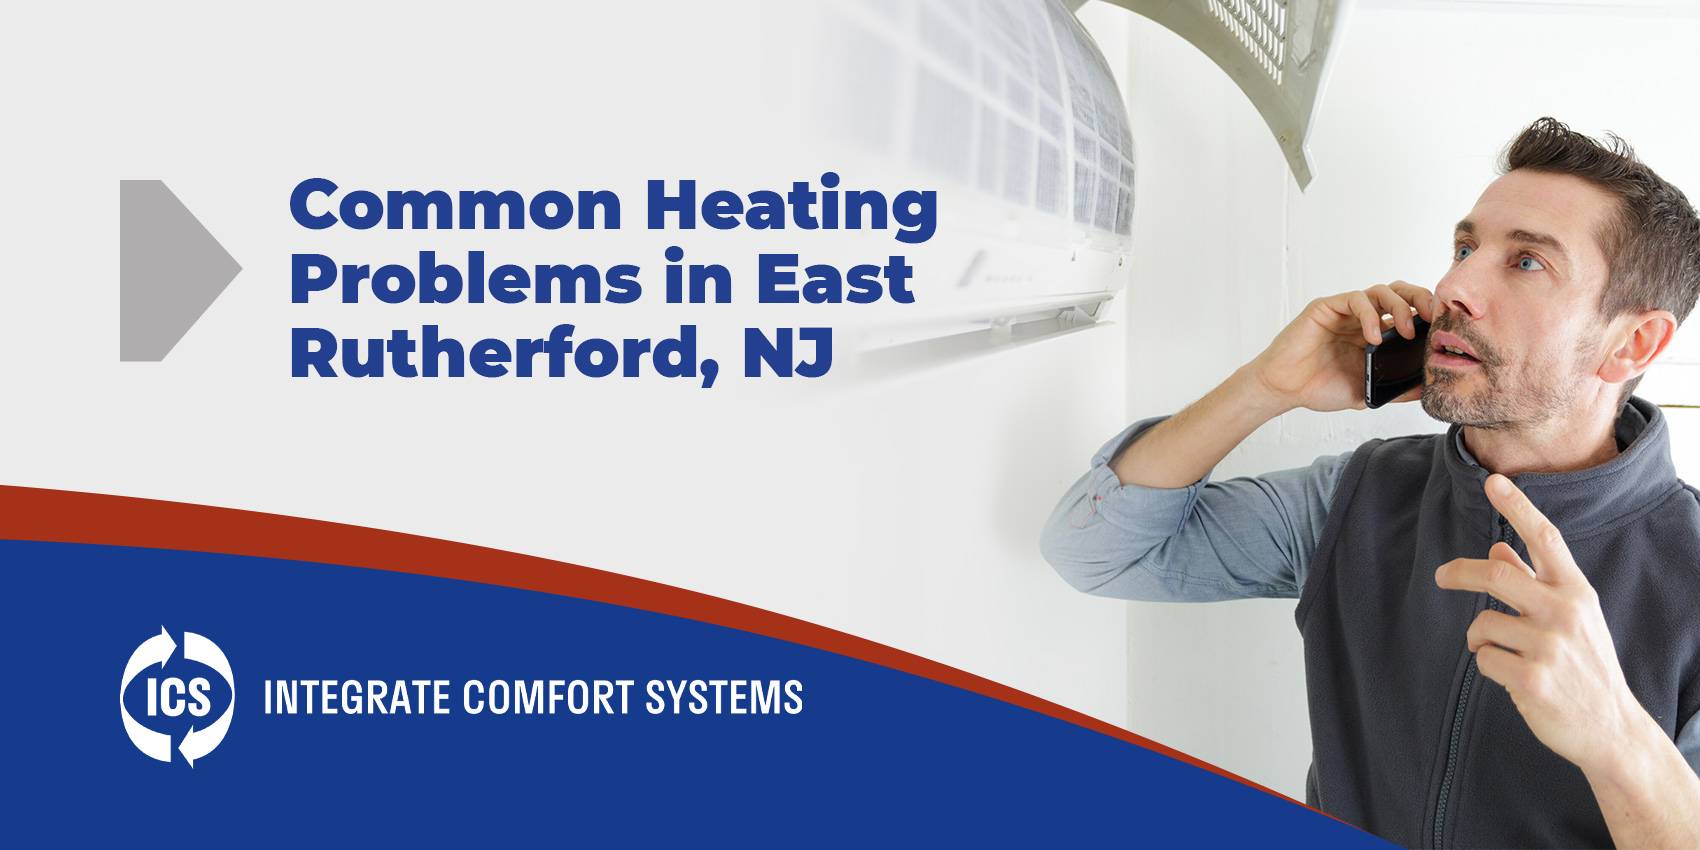 common heating pronlems in east rutherford, NJ from integrated comfort systems